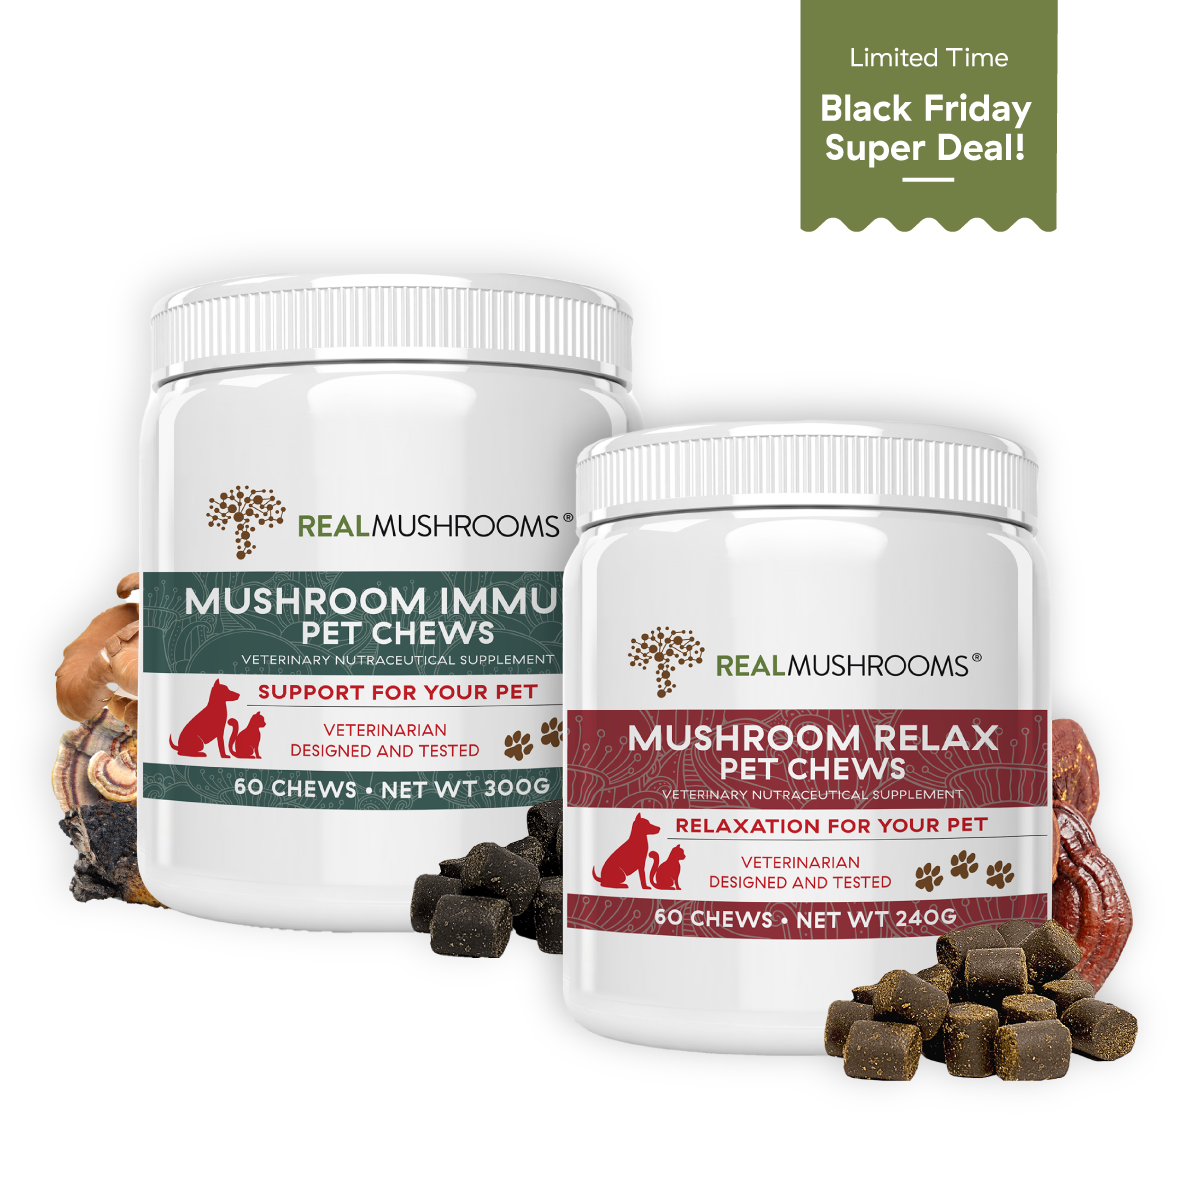 Two containers of RealPets Chew Combo Pack dietary supplements for pets from Real Mushrooms, one for immune support and one for relaxation, with a black friday deal label.